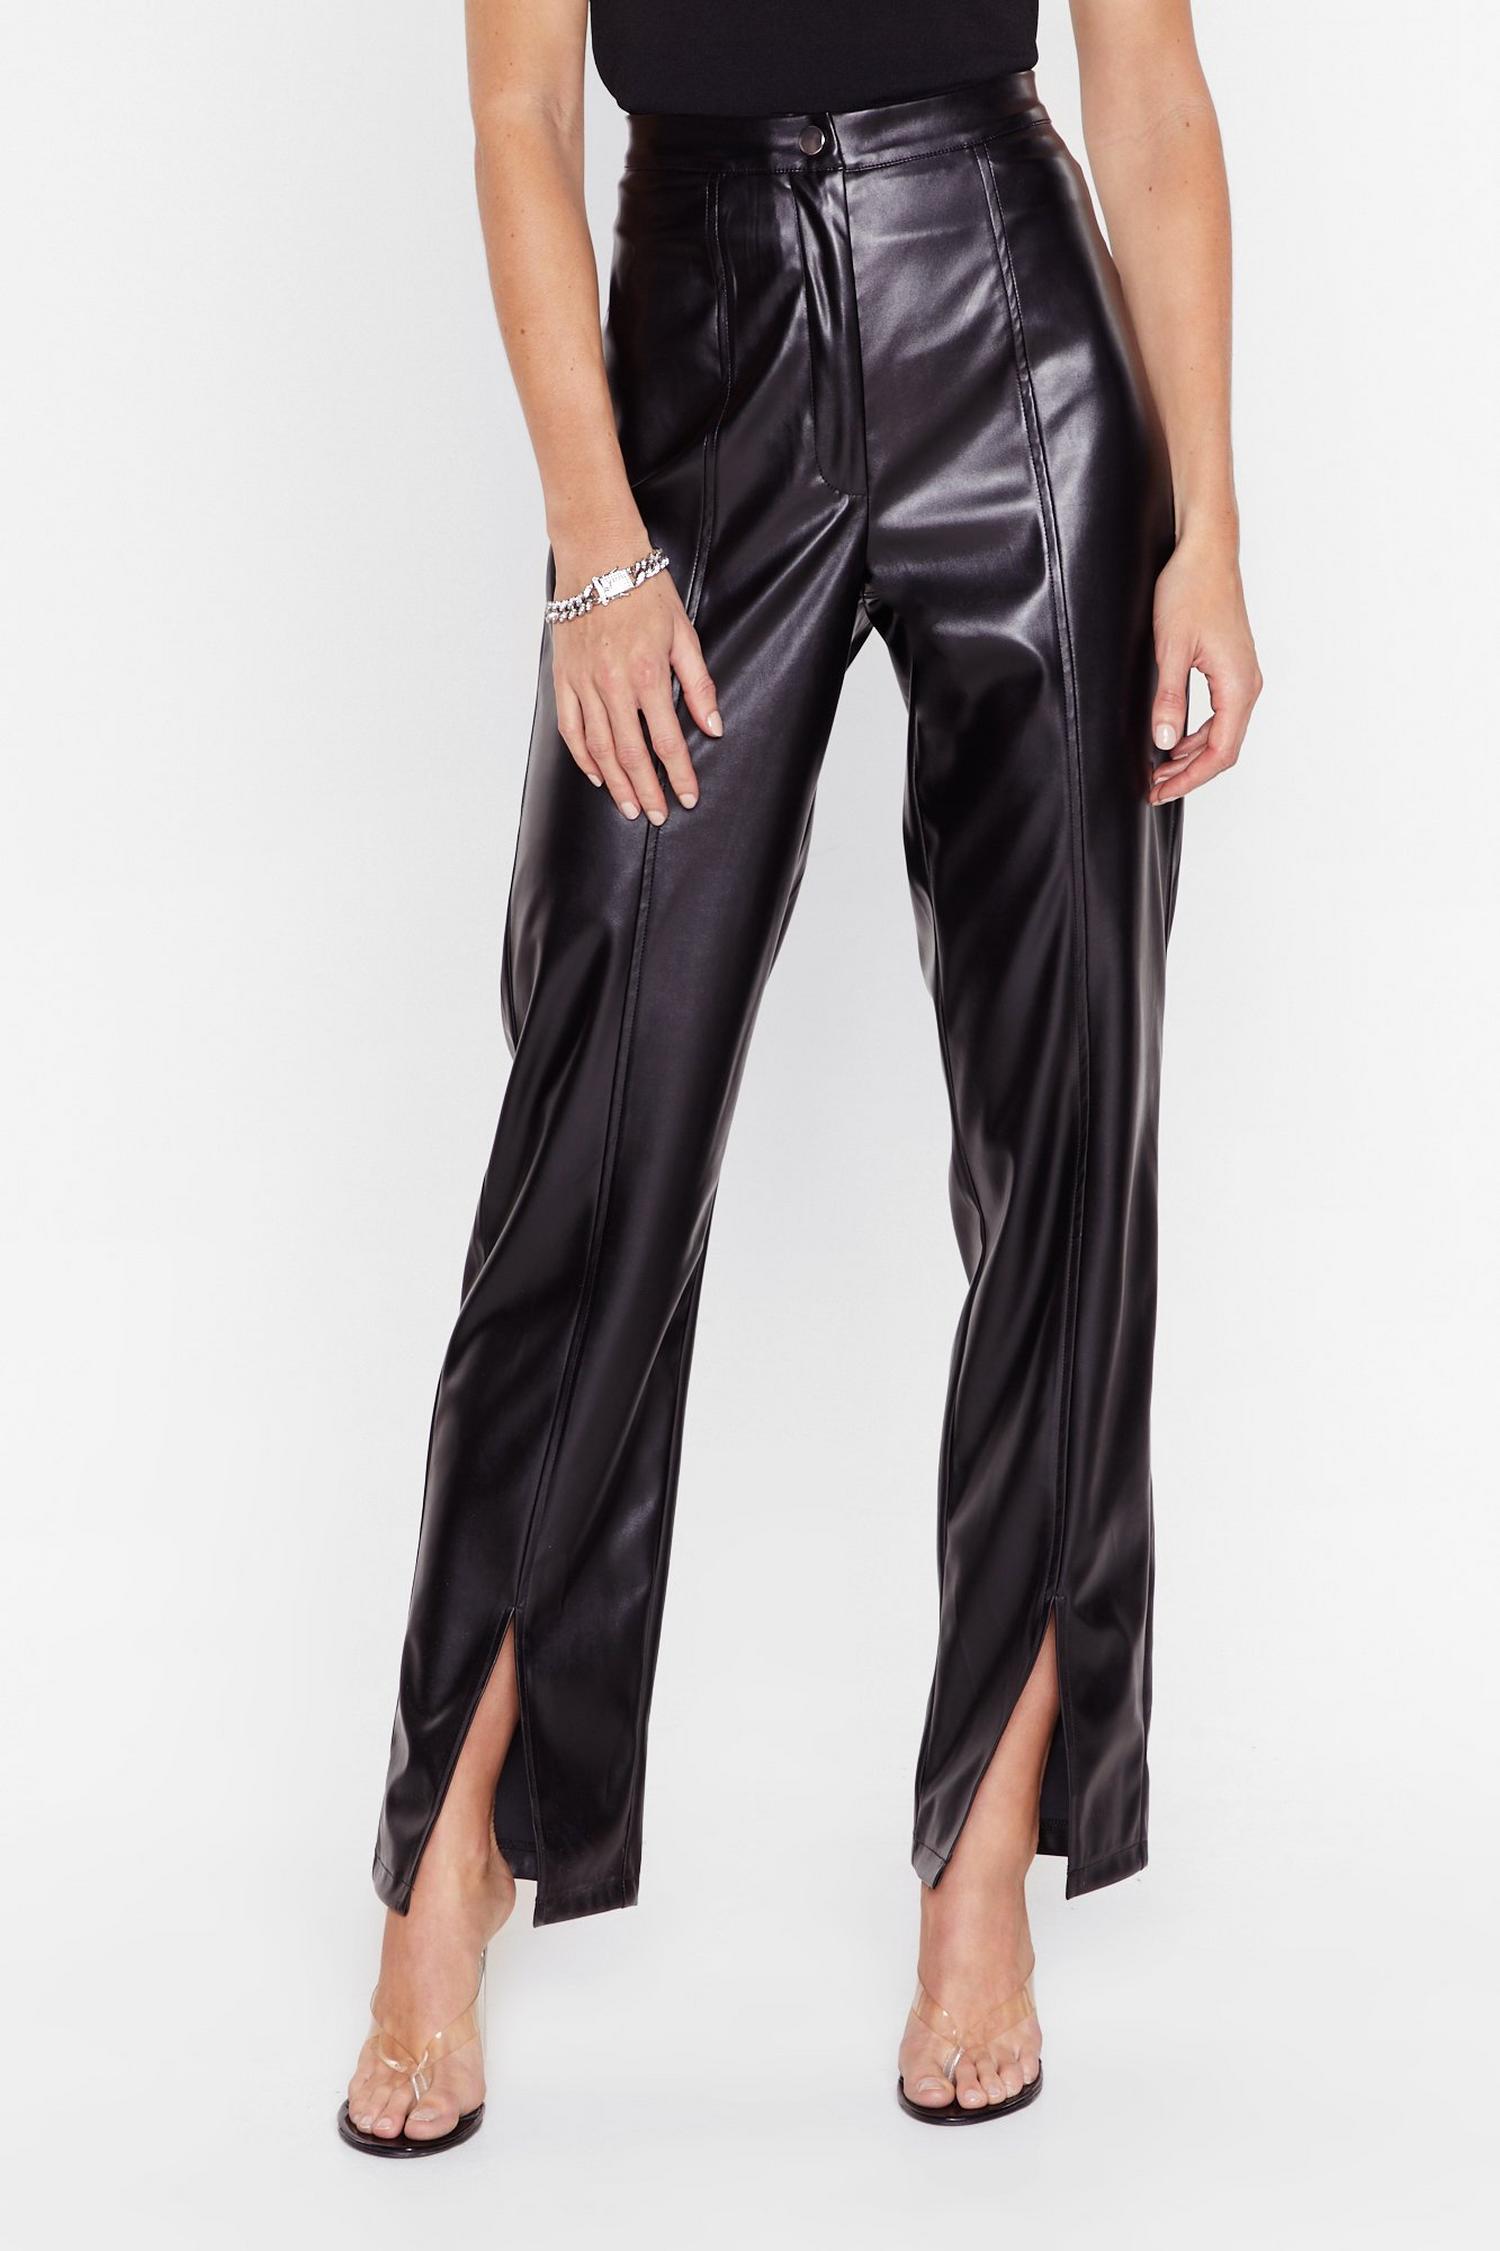 Rise Above Slit Faux Leather High-Waisted Pants | Nasty Gal